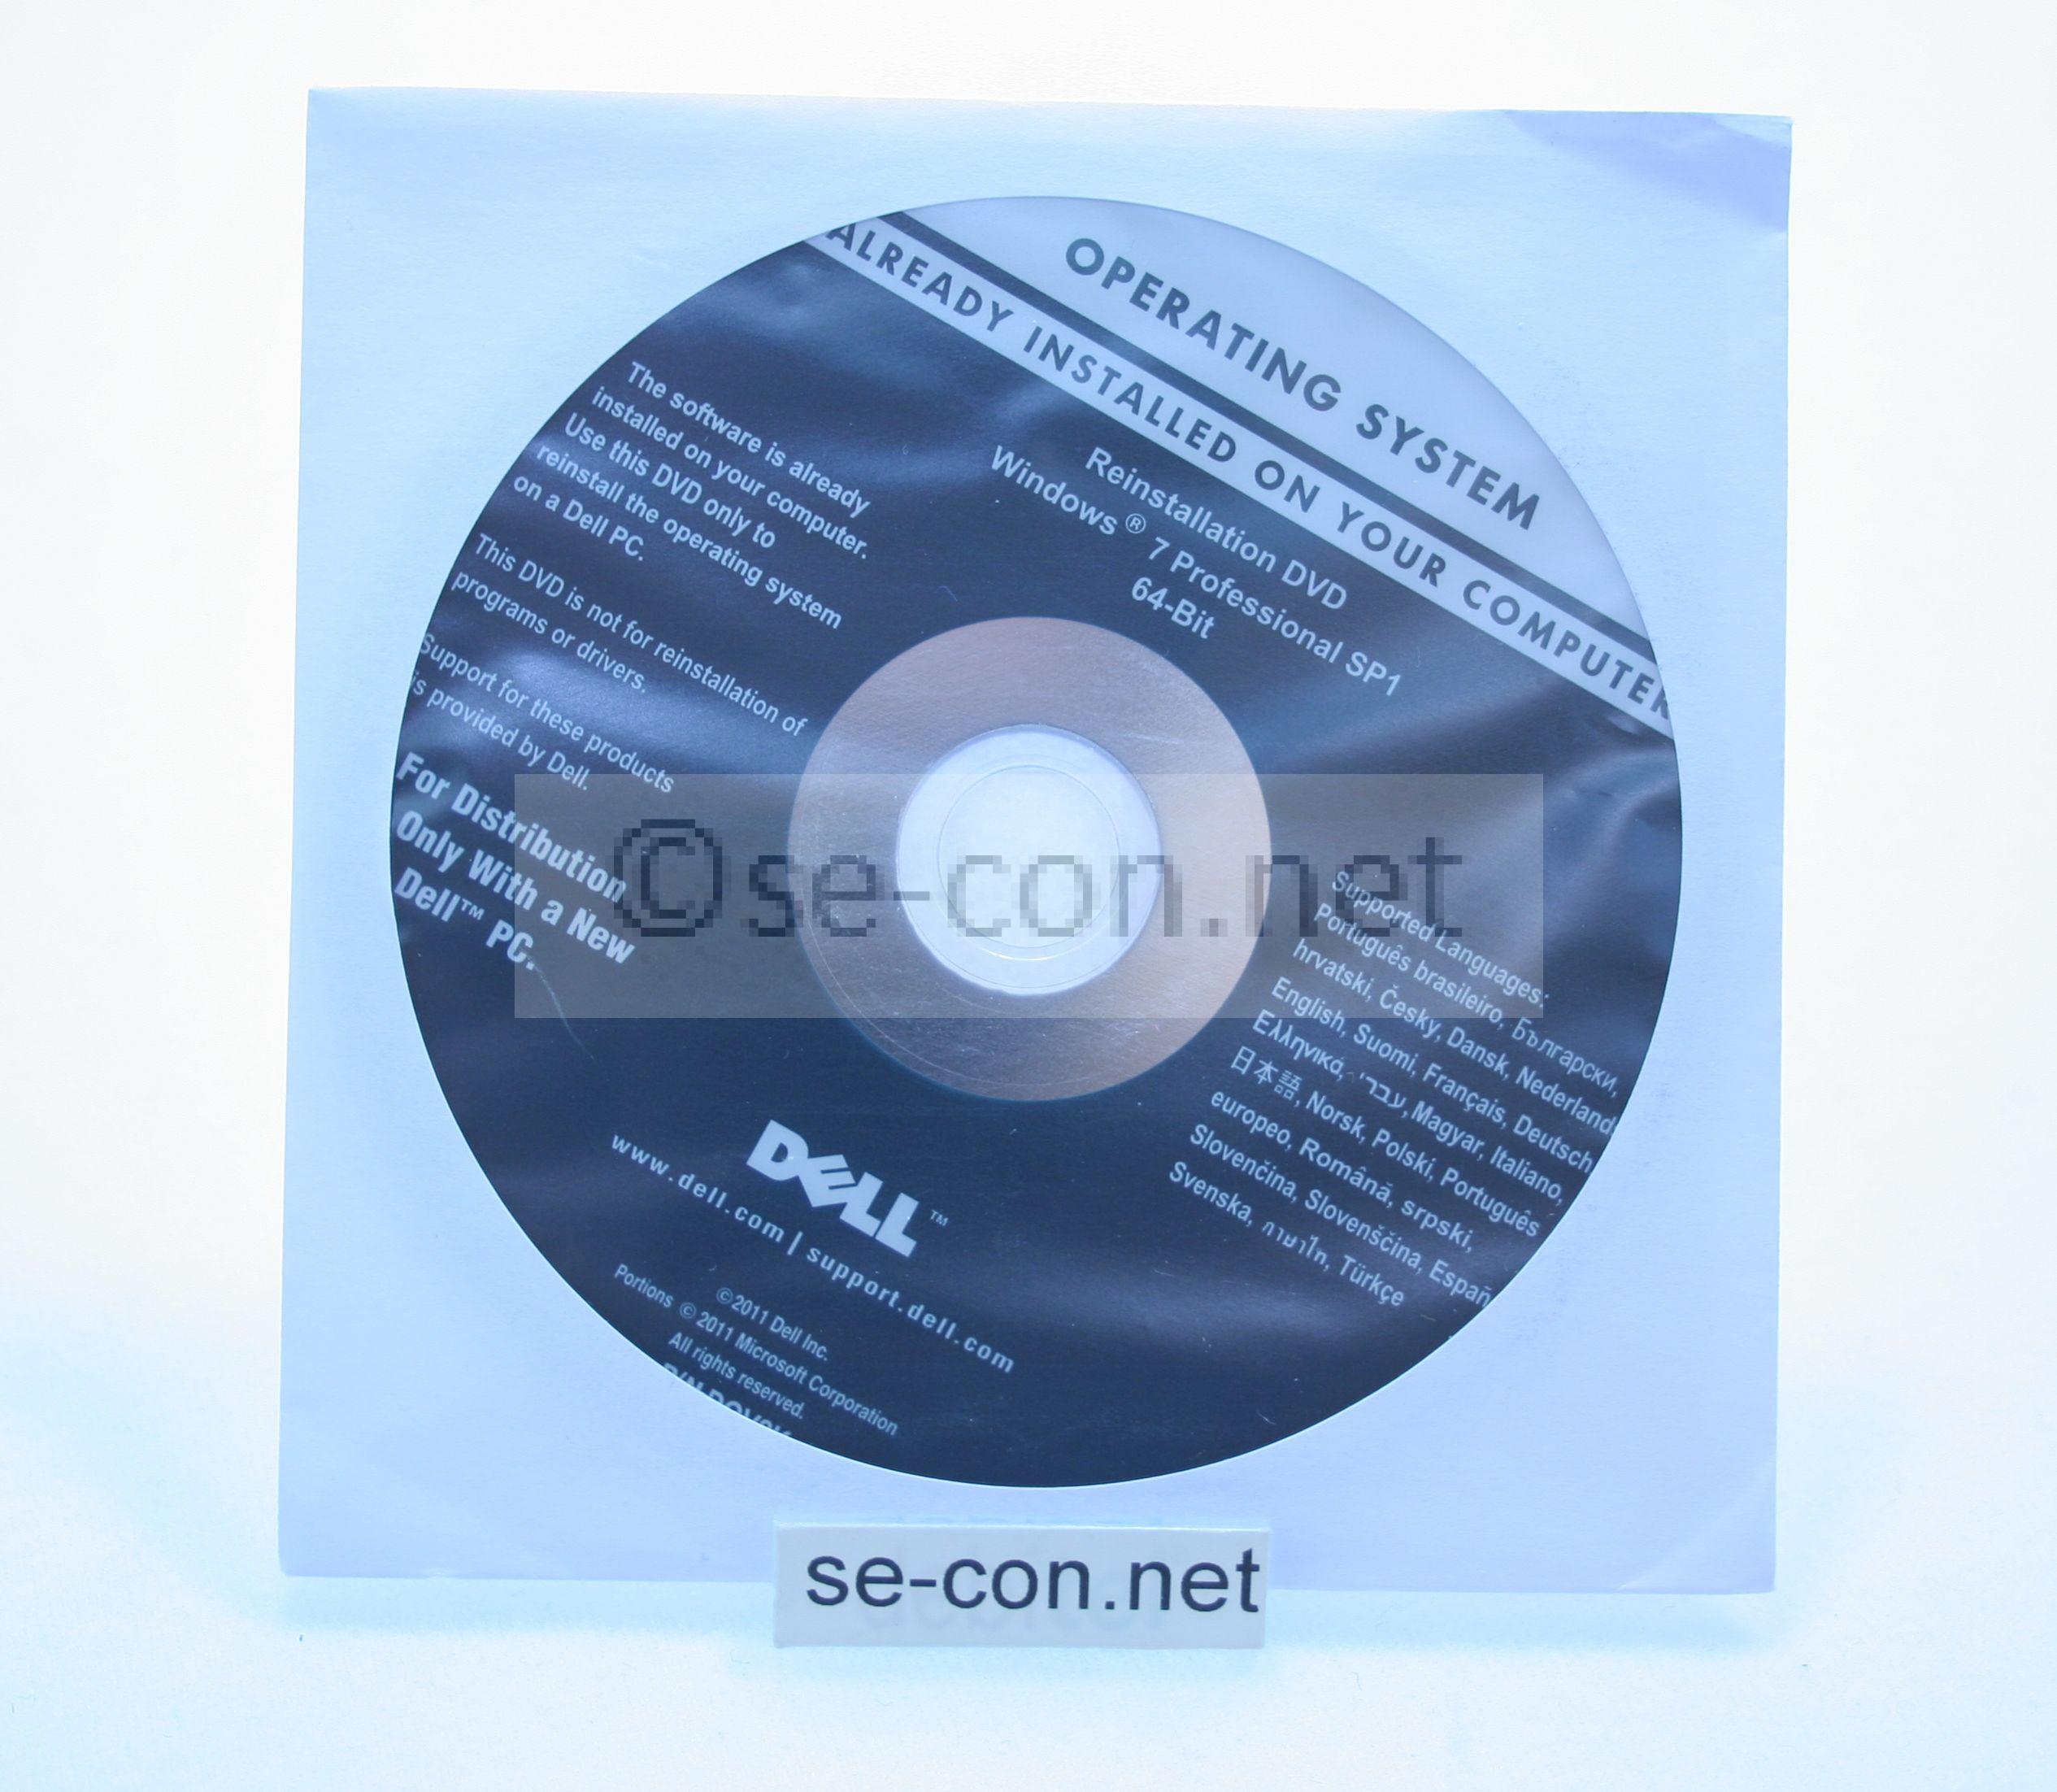 Dell Inspiron 1525 Vista Recovery Disk Iso Download